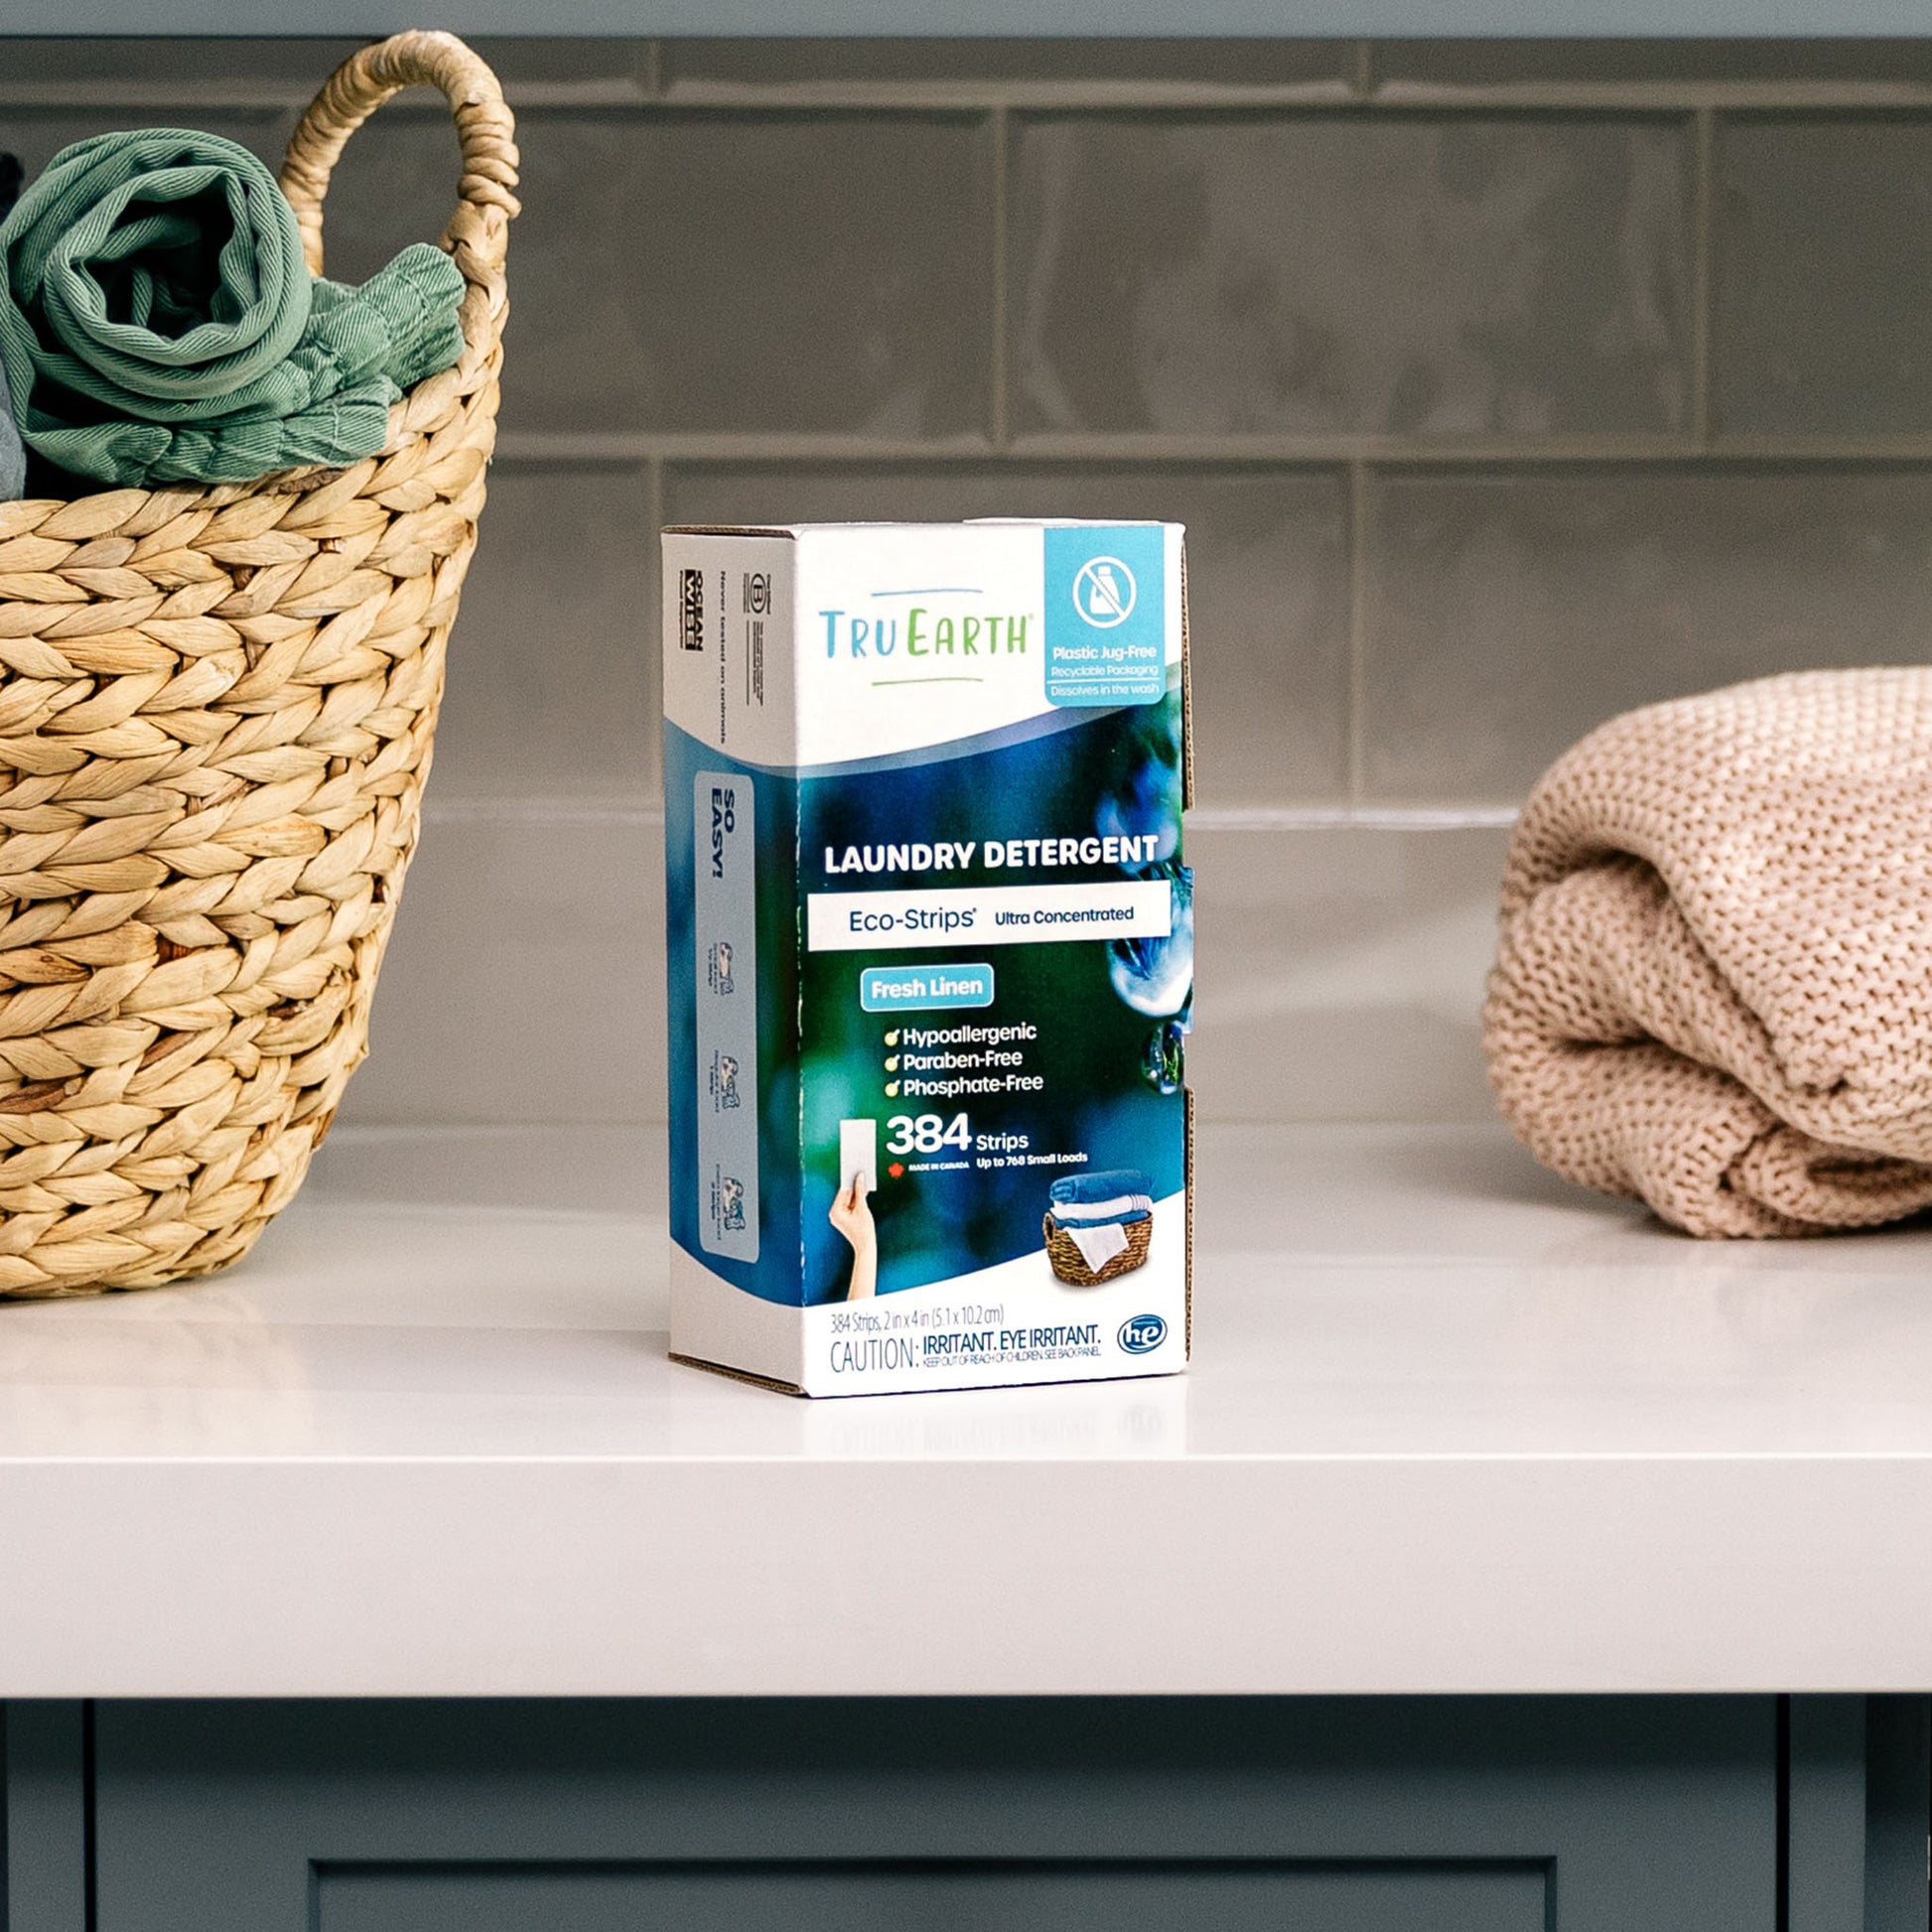 TruEarth Laundry Detergent Fresh Linen Lifestyle Package